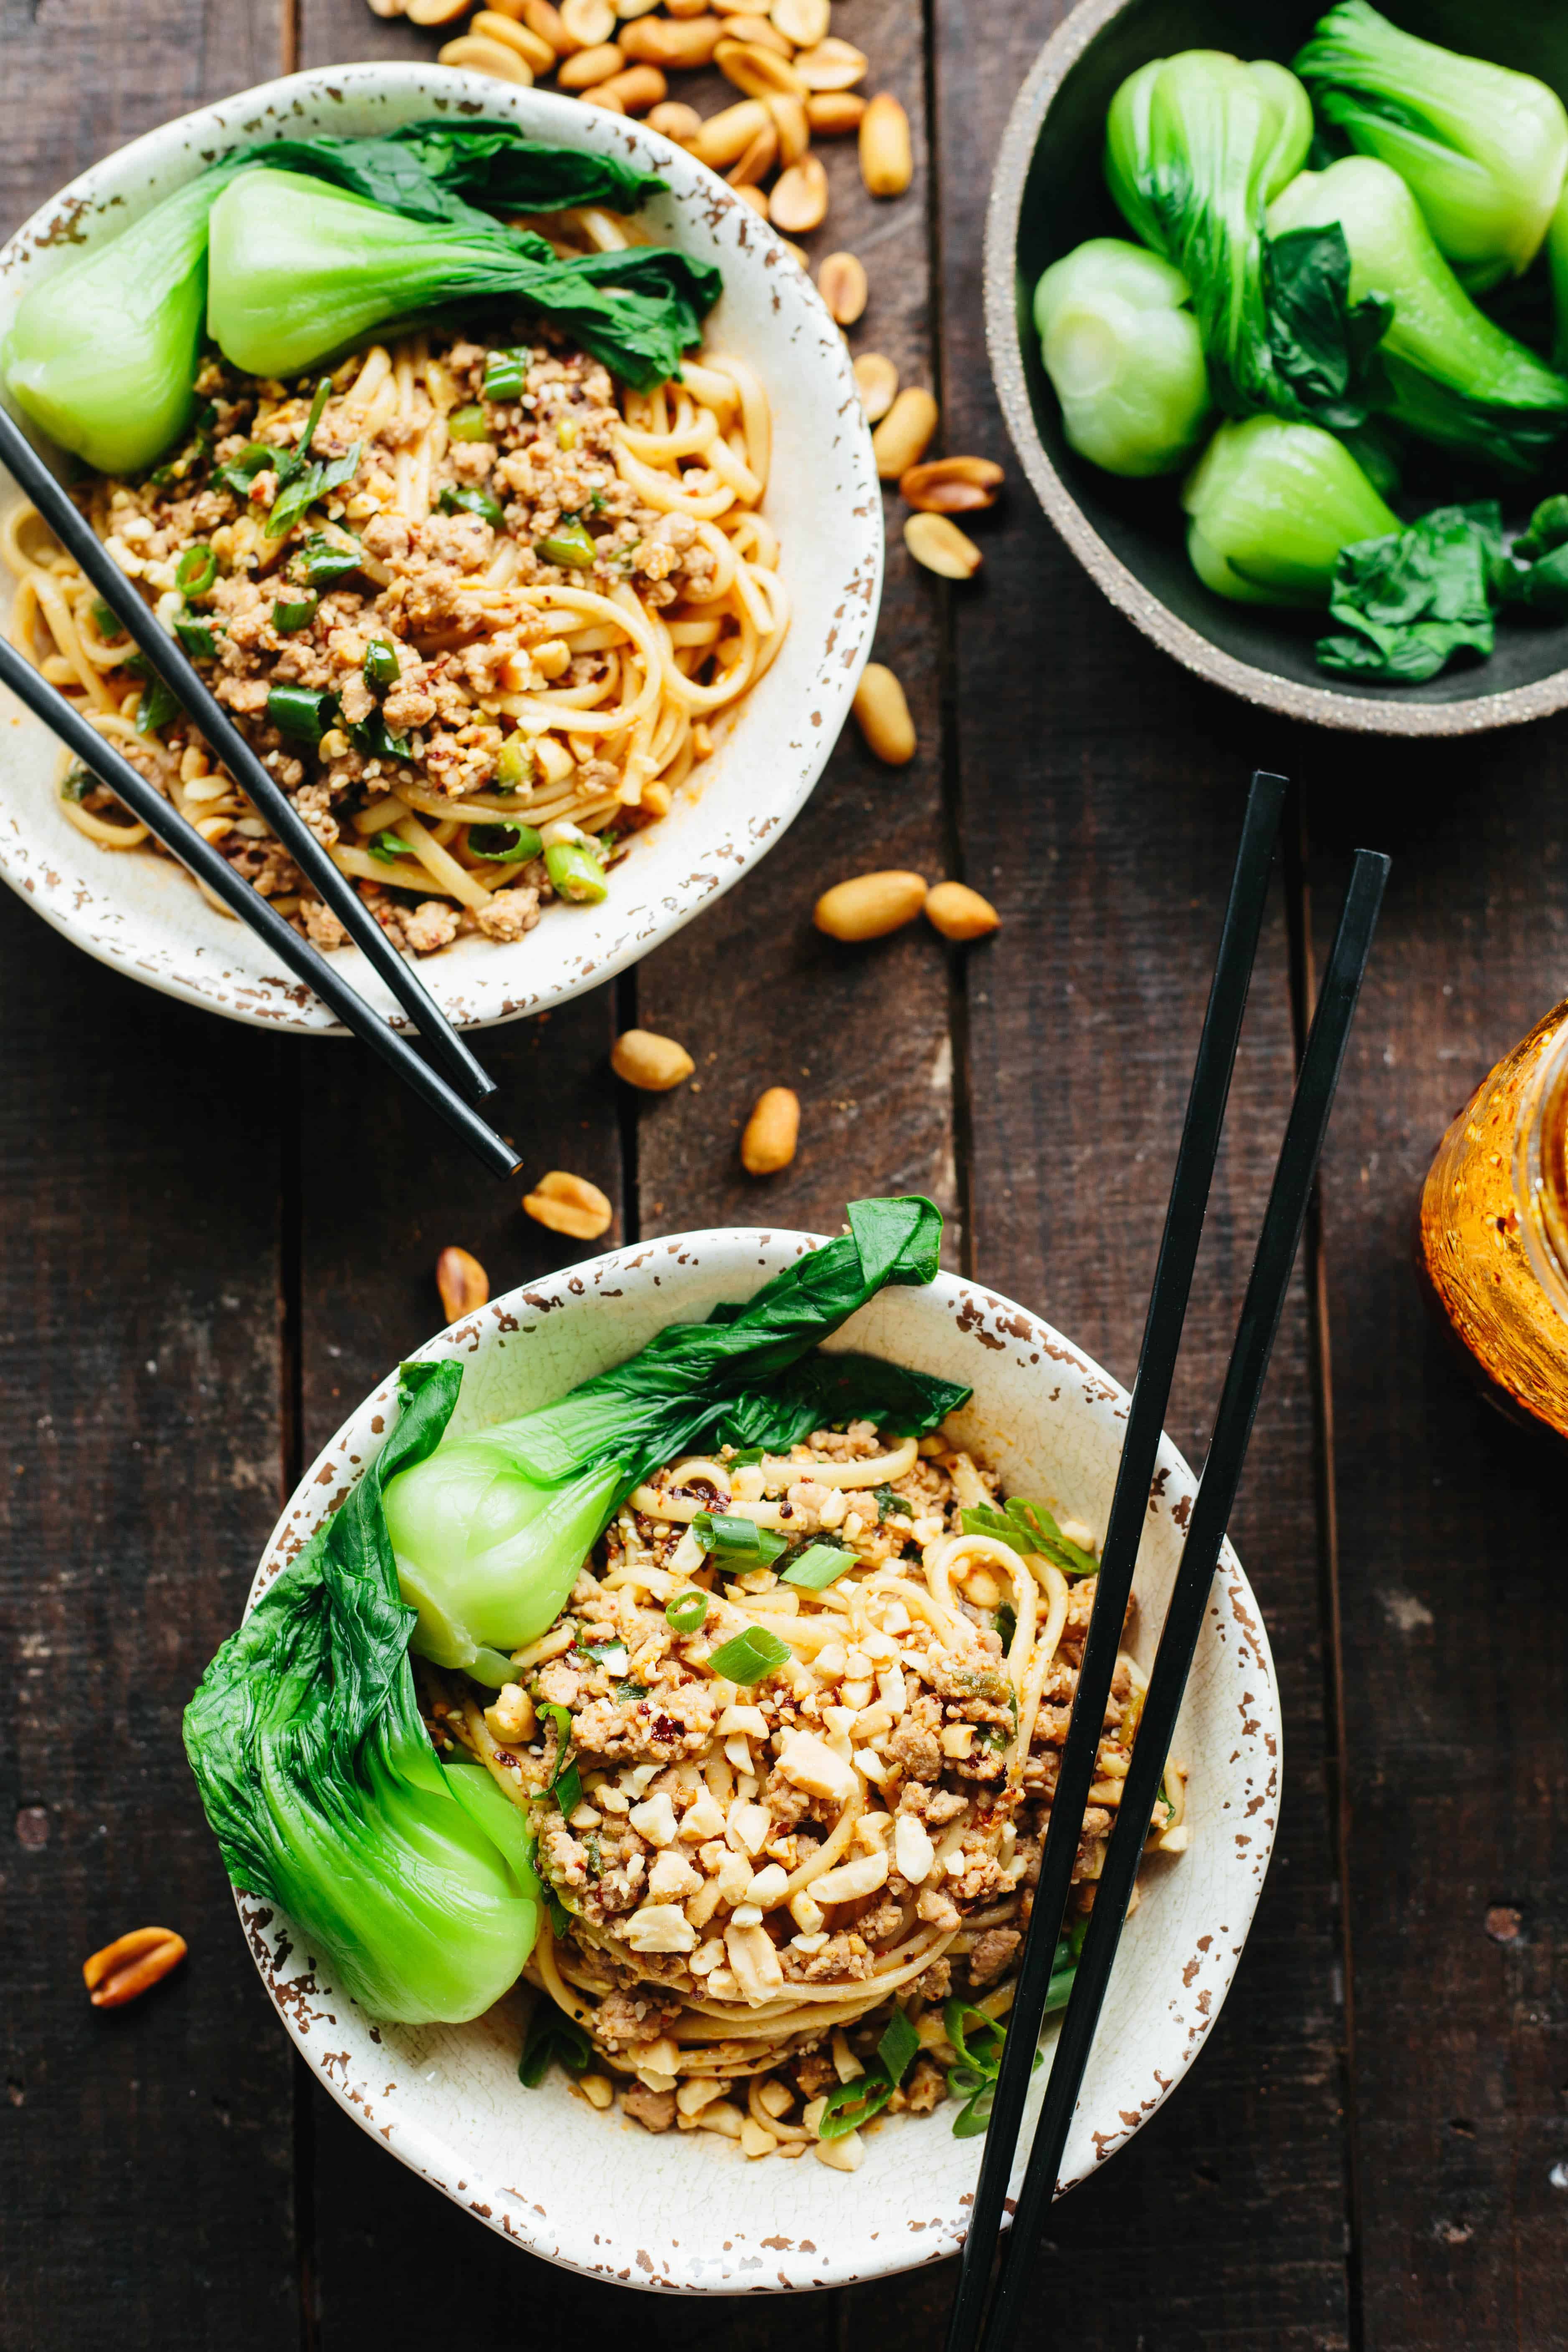 Baby bok choy and dan dan noodles with chopsticks stuck in them in white bowls.